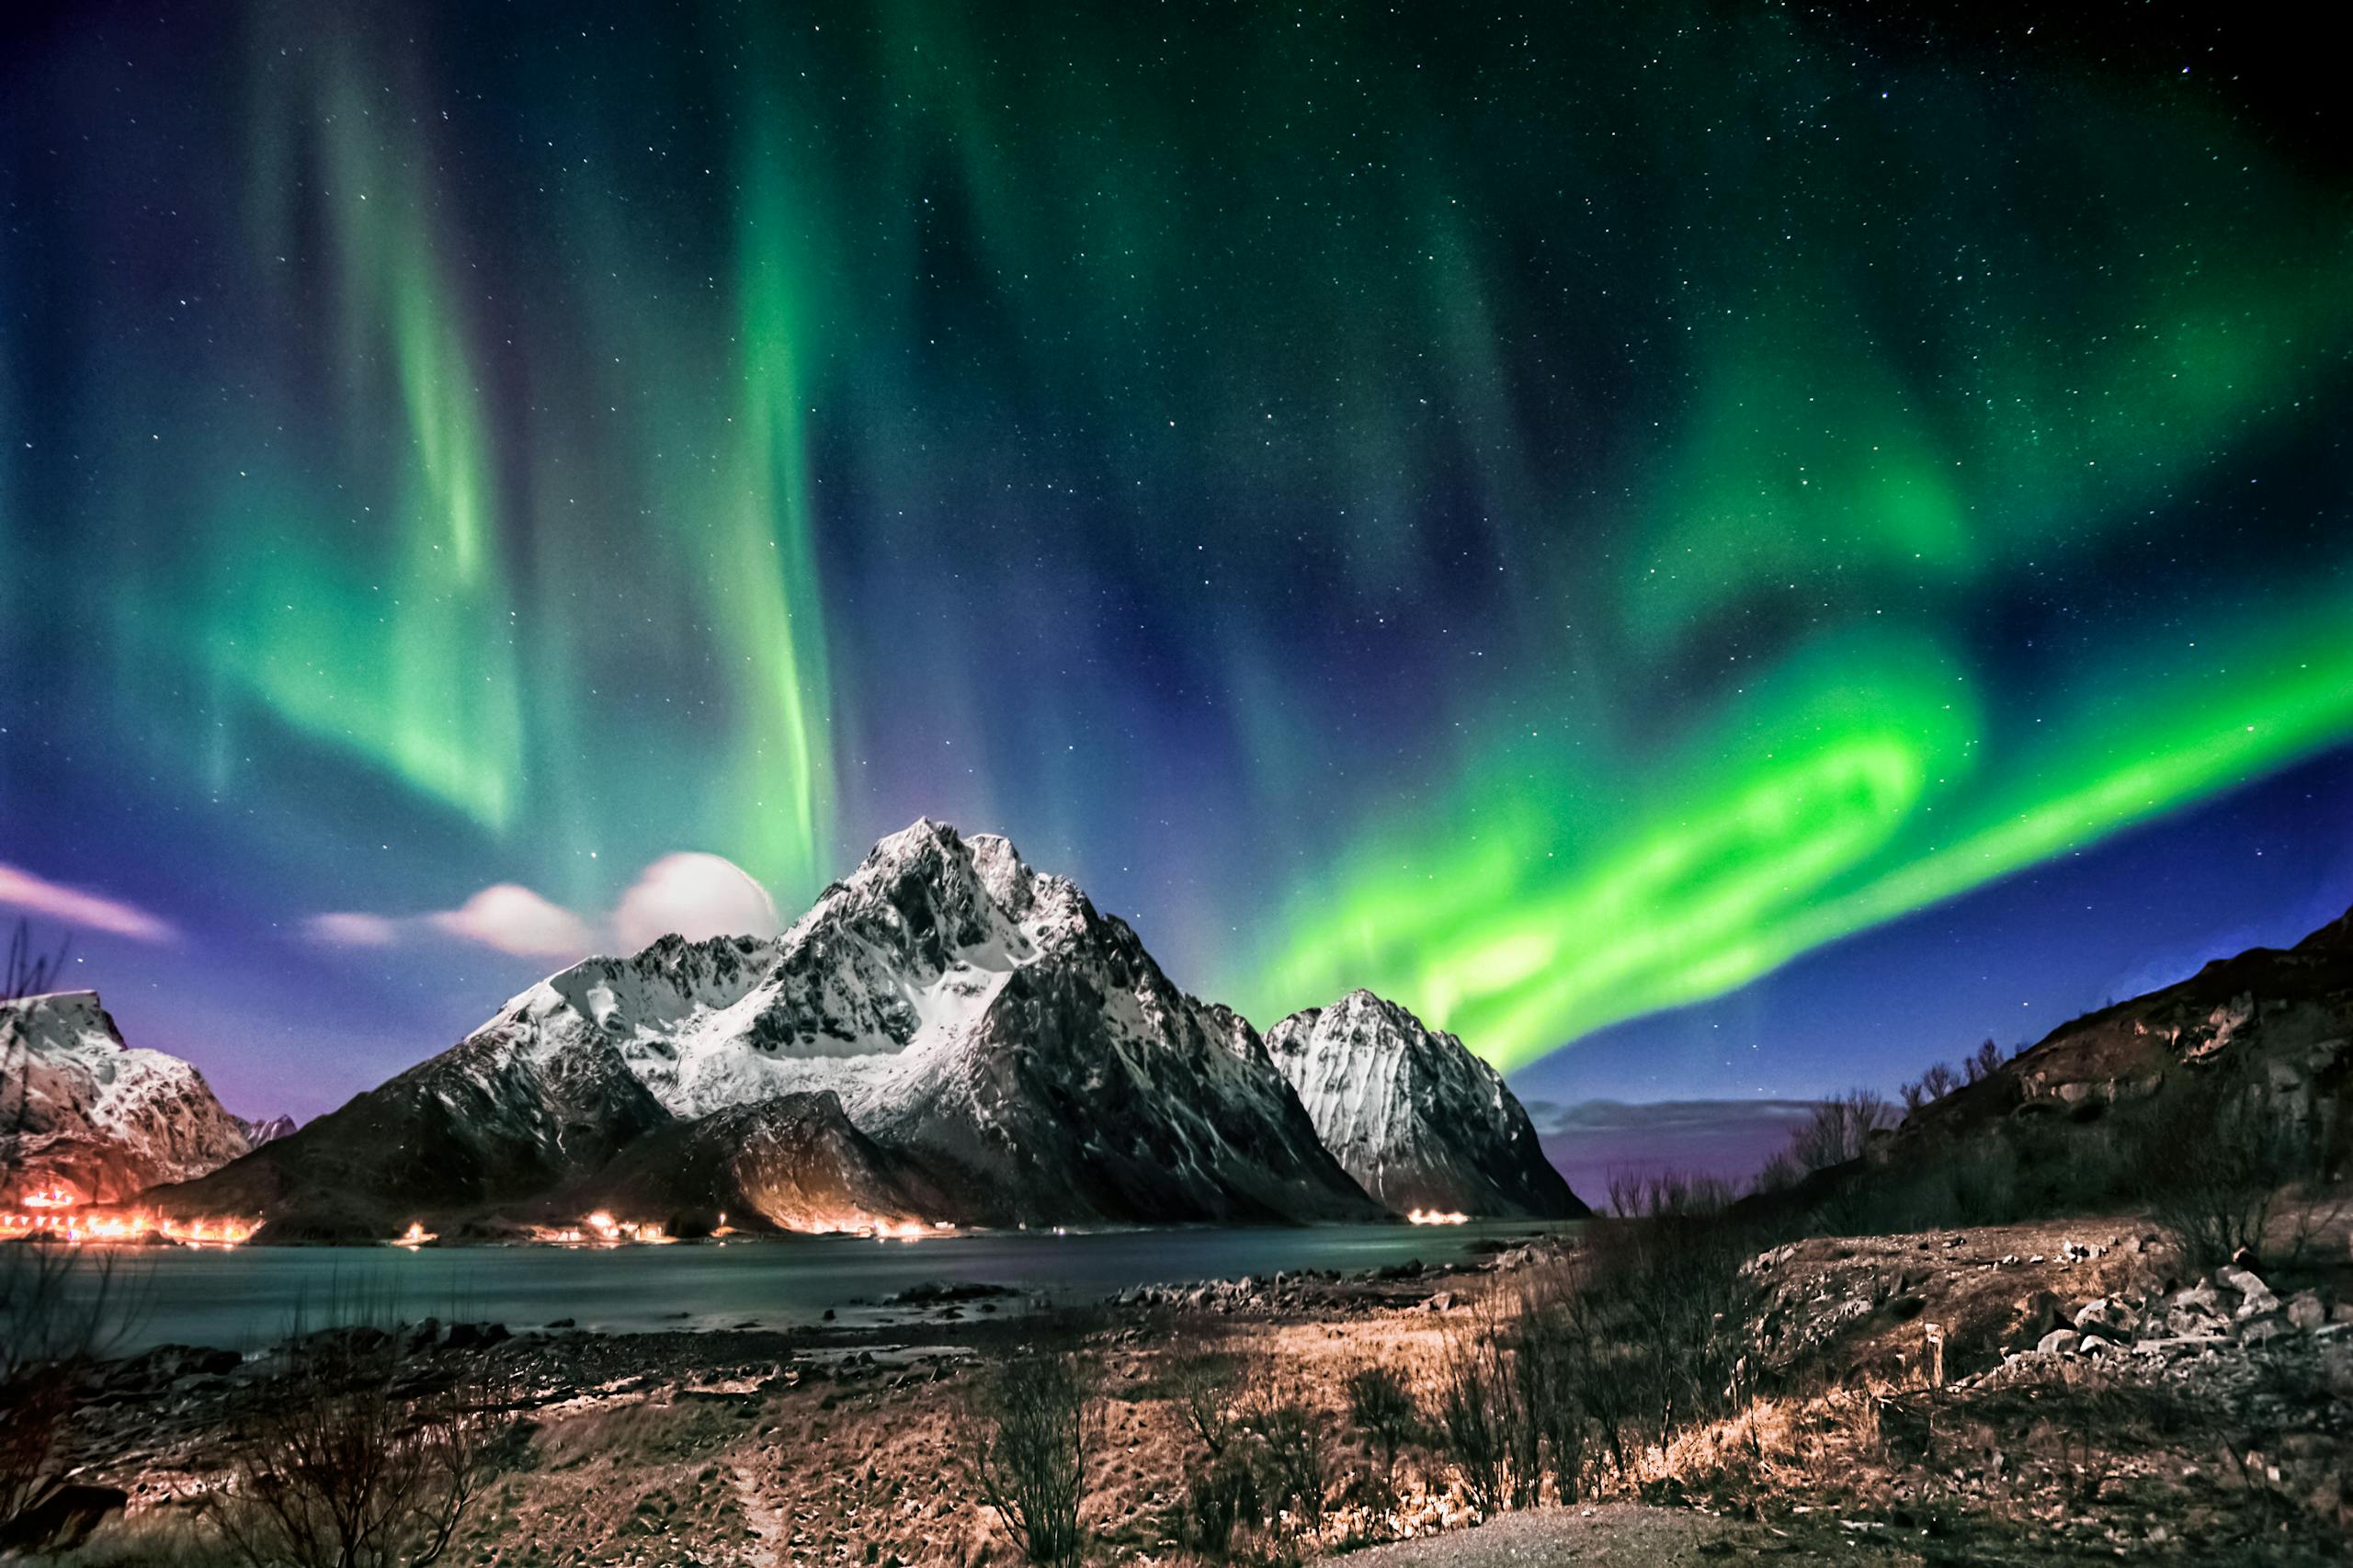 A Snow Covered Ground Under the Green and Blue Aurora Lights in the Sky at Night